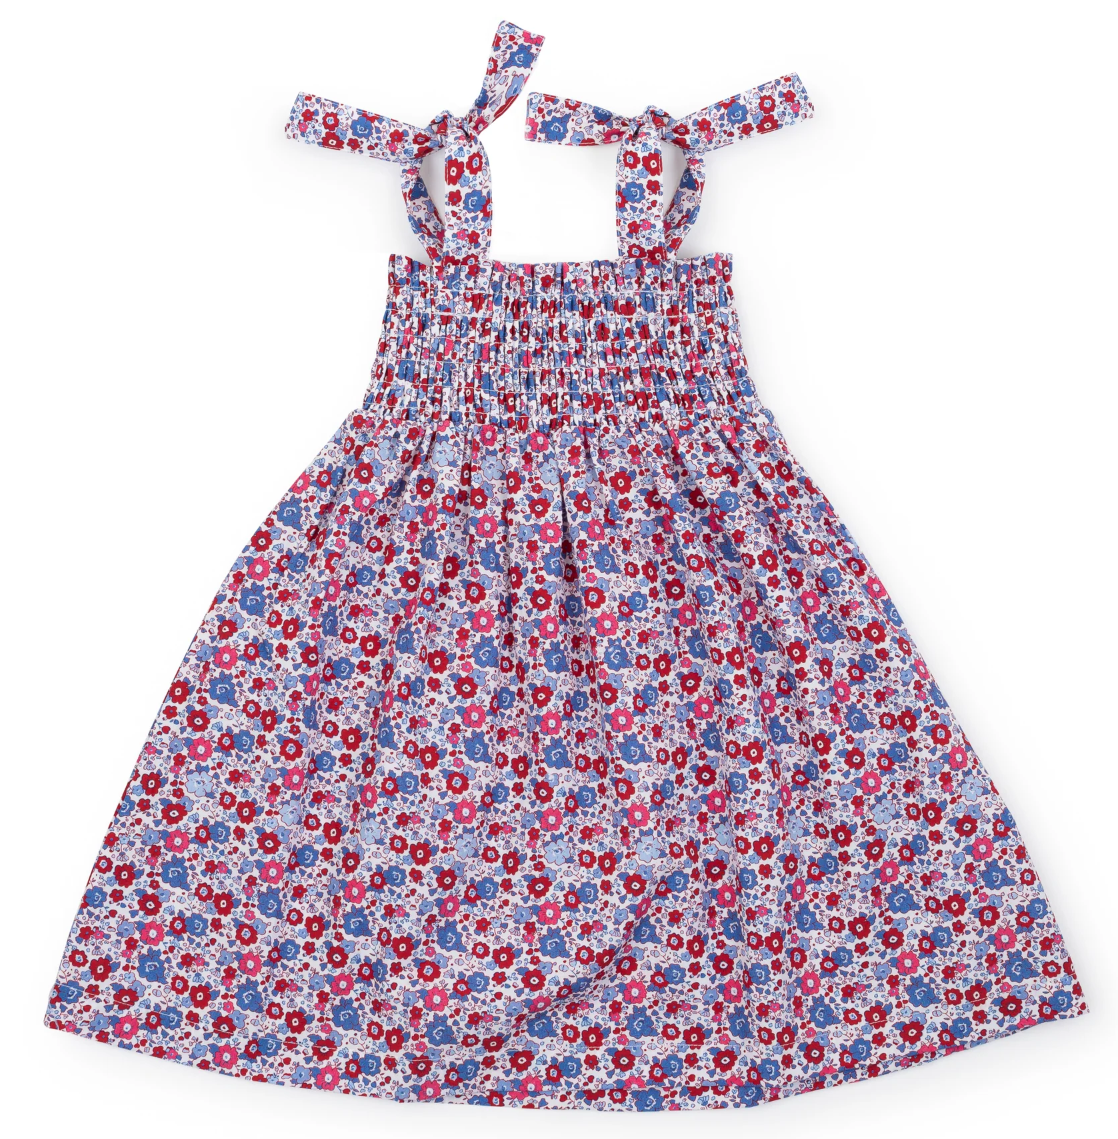 Betsy Dress in Freedom Floral, Size: 2T